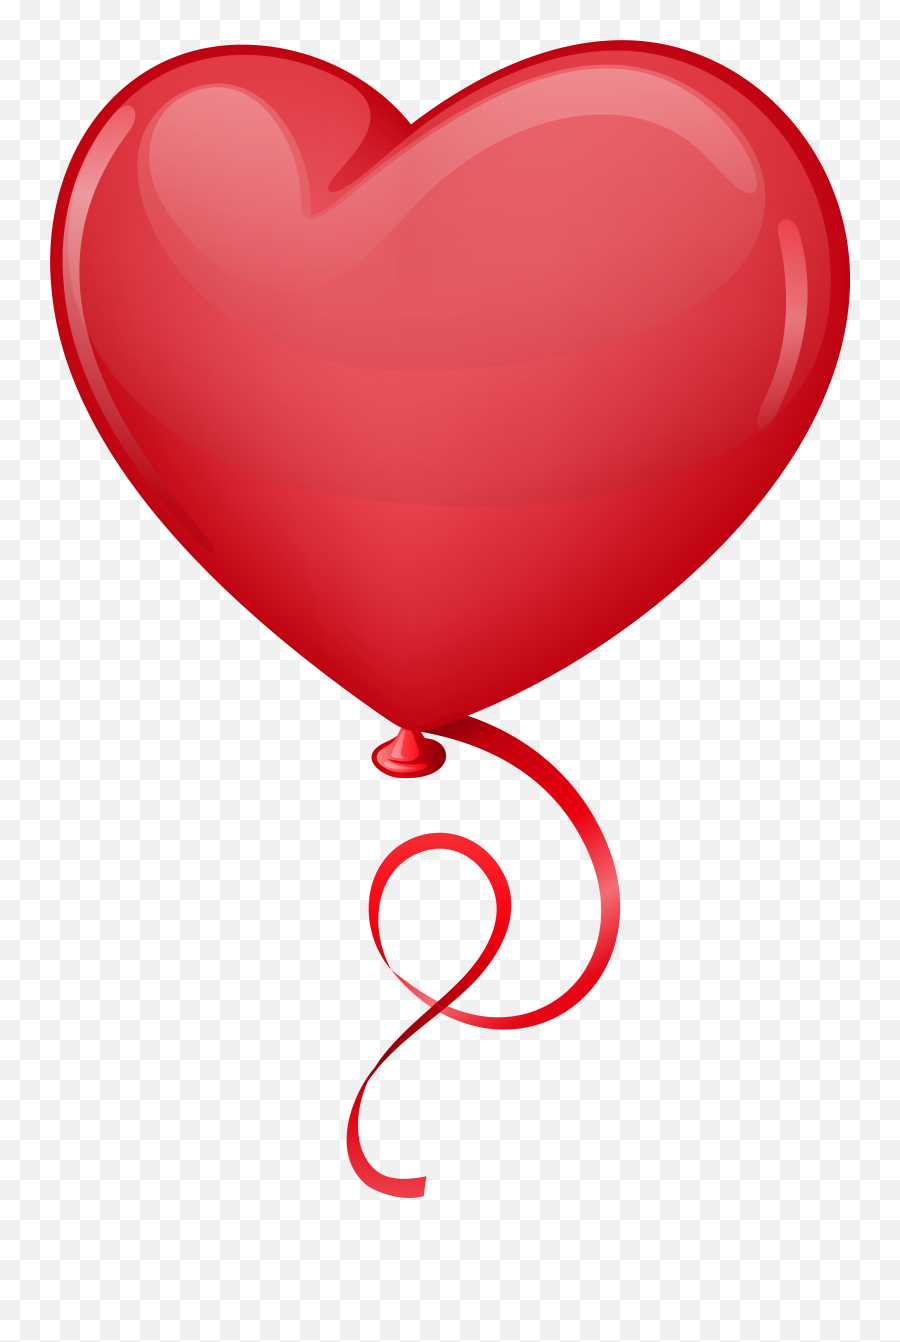 Balloons Clipart Png - Red Balloon Clip Art Png Image Emoji,Balloons Clipart Transparent Background